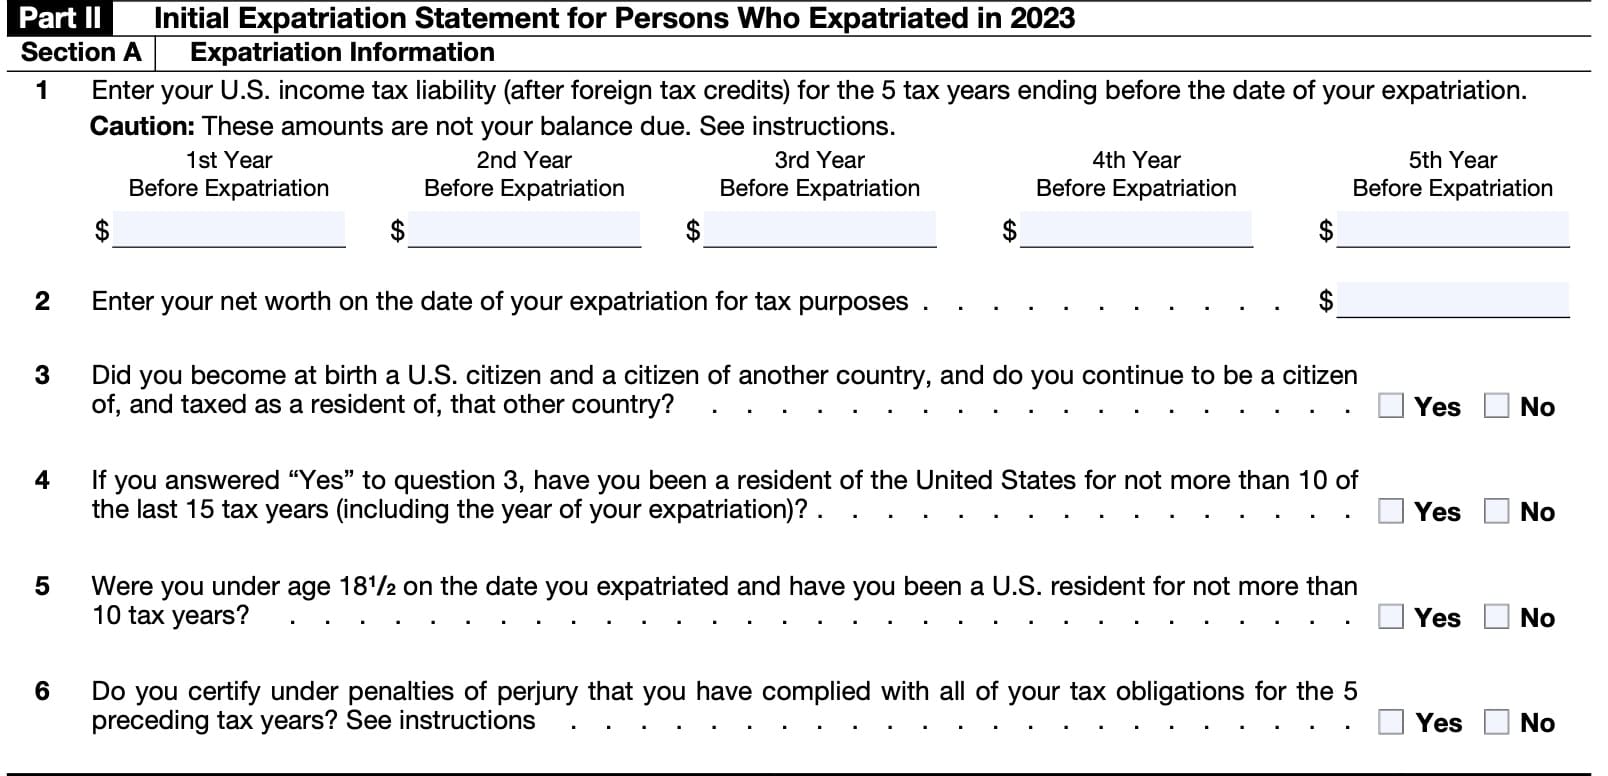 irs form 8854, part II, Section A: Expatriation information